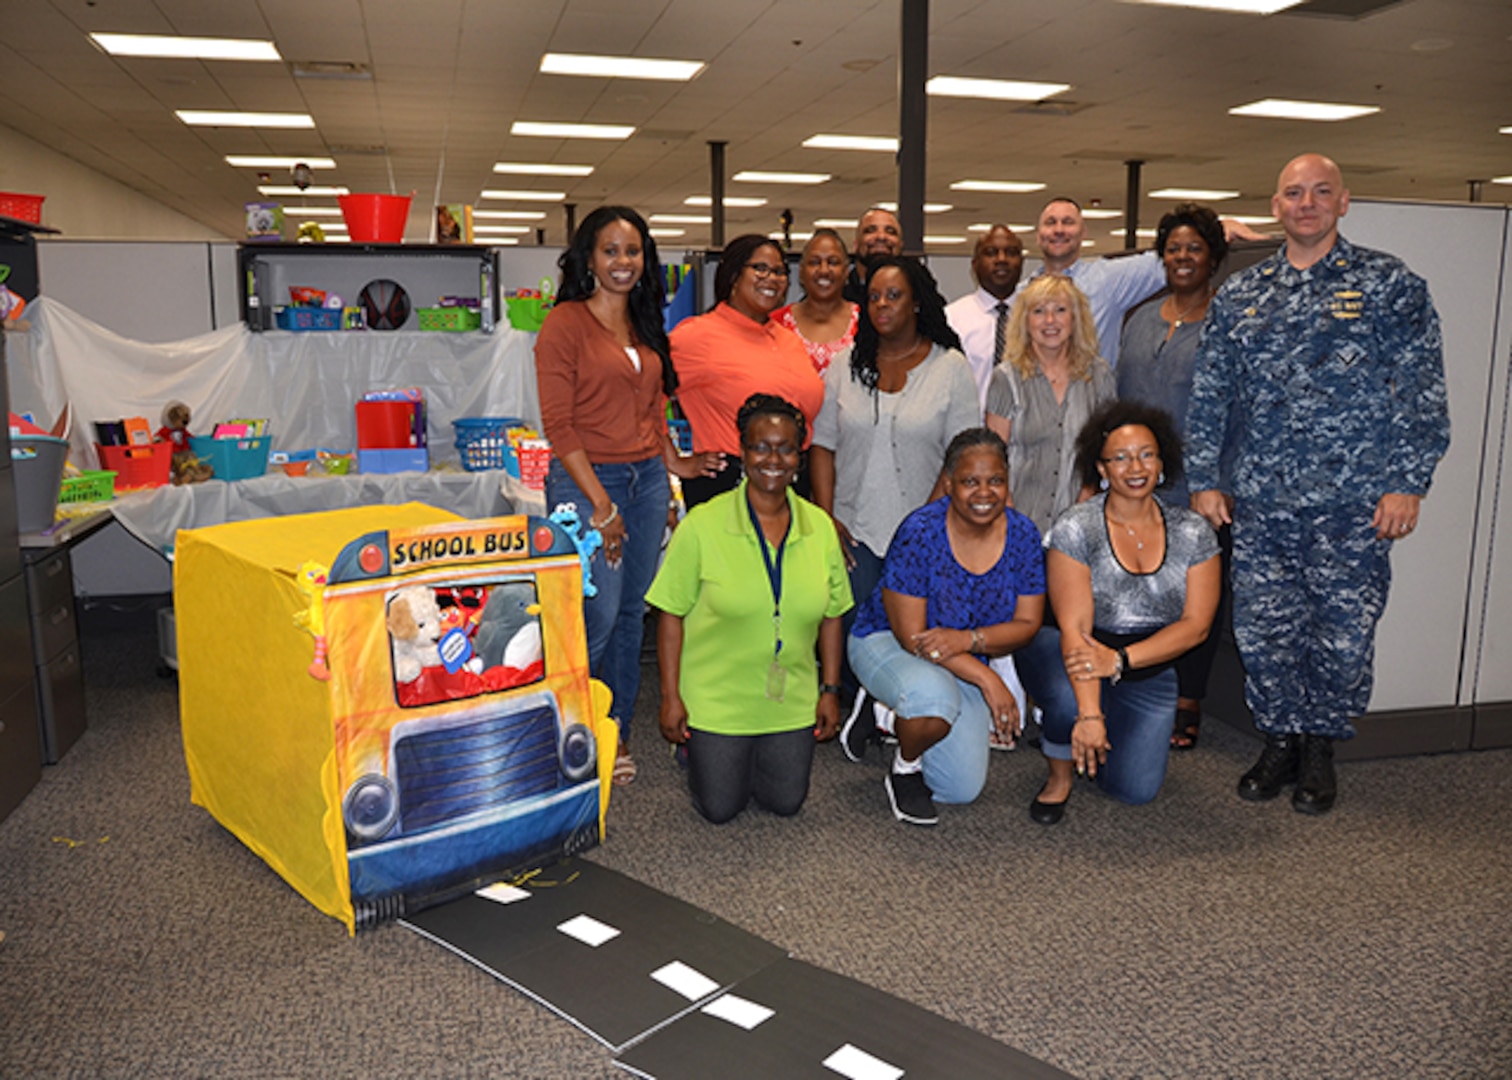 The School Team, made up of employees from DLA Aviation Supplier Operations and Planning Process Directorates, poses with their display June 7, 2017. The temporary team, formed to build morale and comradery, collected supplies for Baker Elementary School in Henrico County, Virginia.  The school closed after a fire last year and will reopen this fall. 